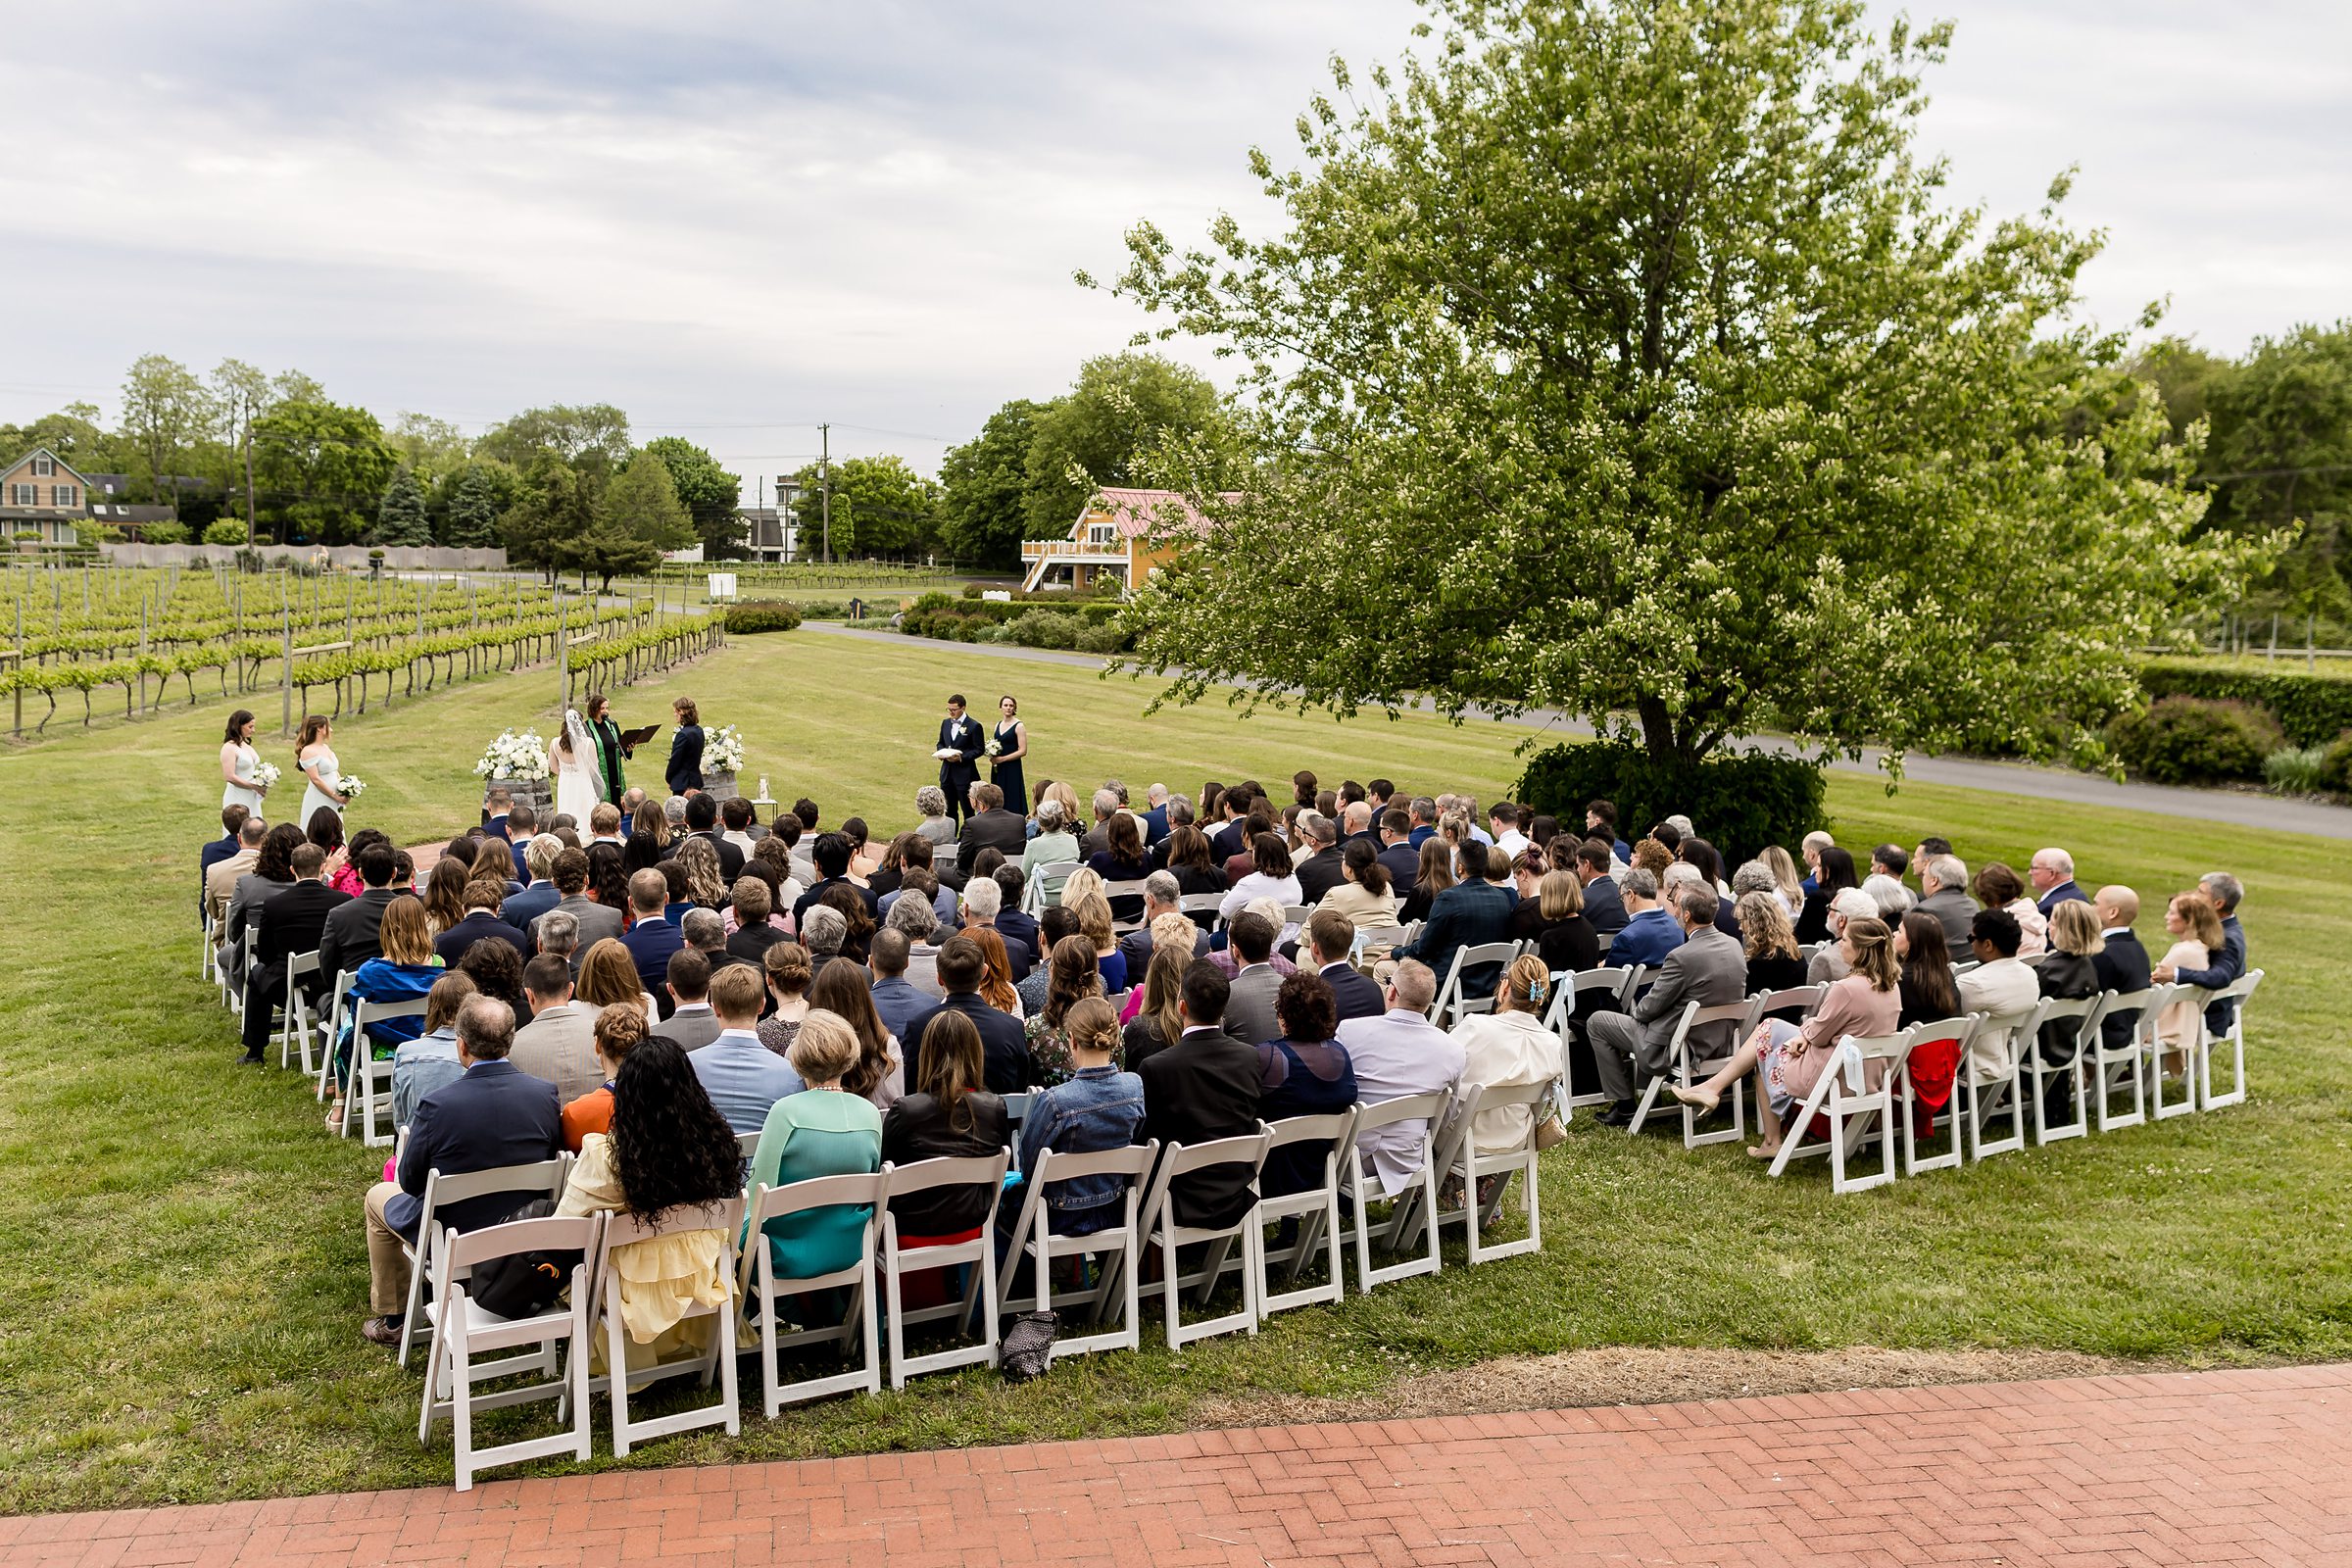 A large group of people seated outdoors at a wedding ceremony. The setting is a vineyard with green fields and trees in the background.